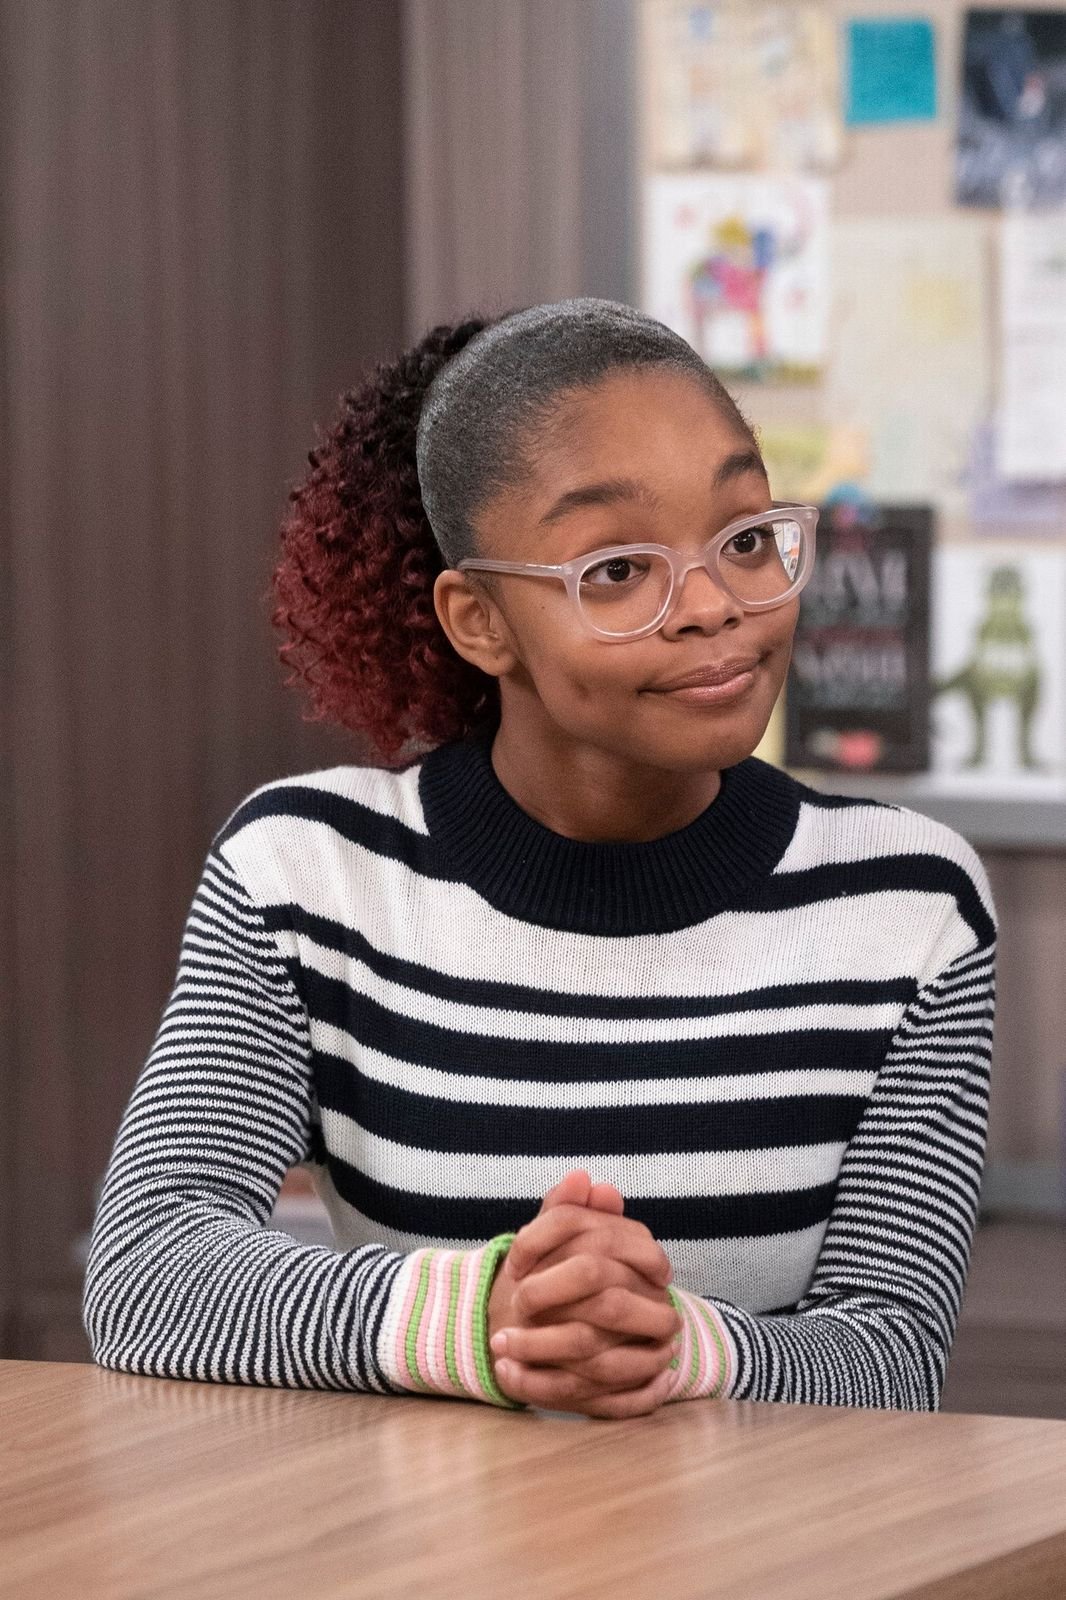 Marsai Martin on the set of the "Black-ish" series for the "Is It Desert or Dessert?" episode on March 8, 2019. | Photo: Getty Images